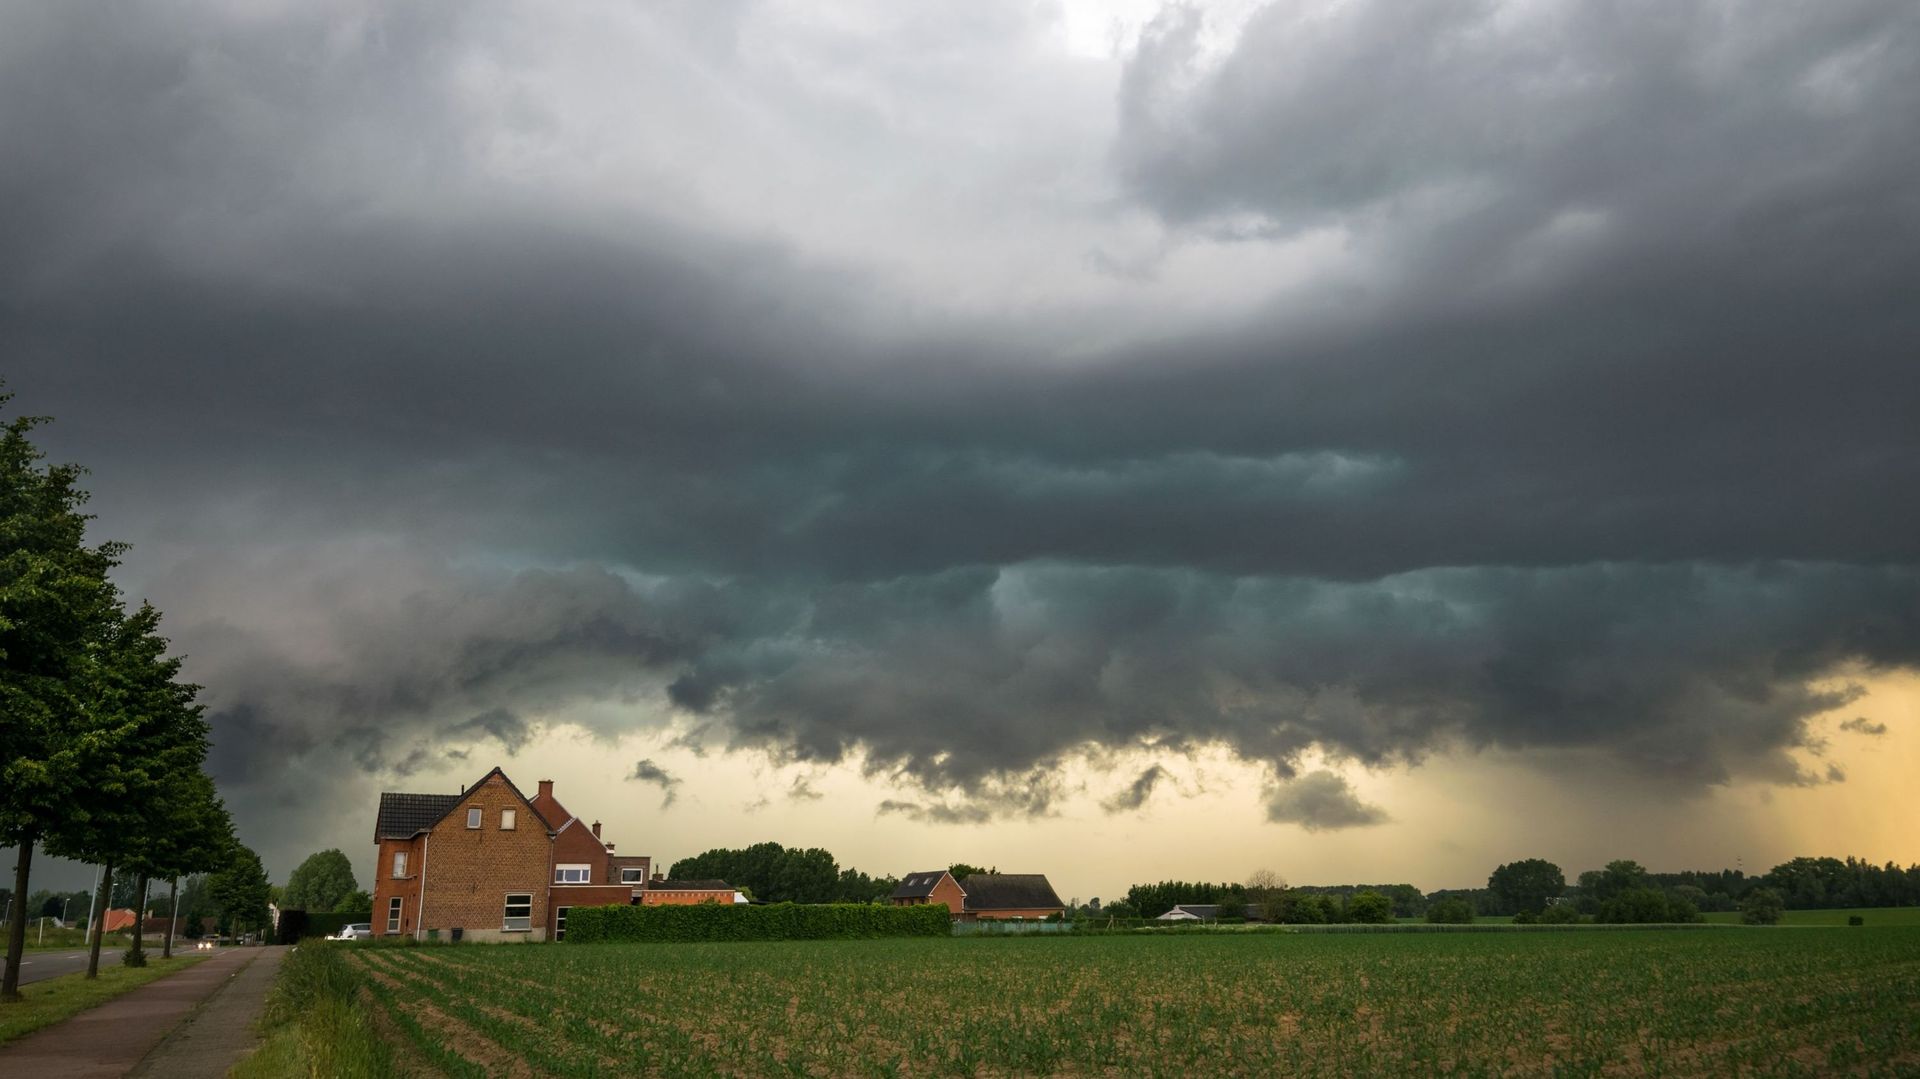 Ominous sky as the gust front of a severe thunderstorm is moving fast over the landscape of eastern Flanders, Belgium